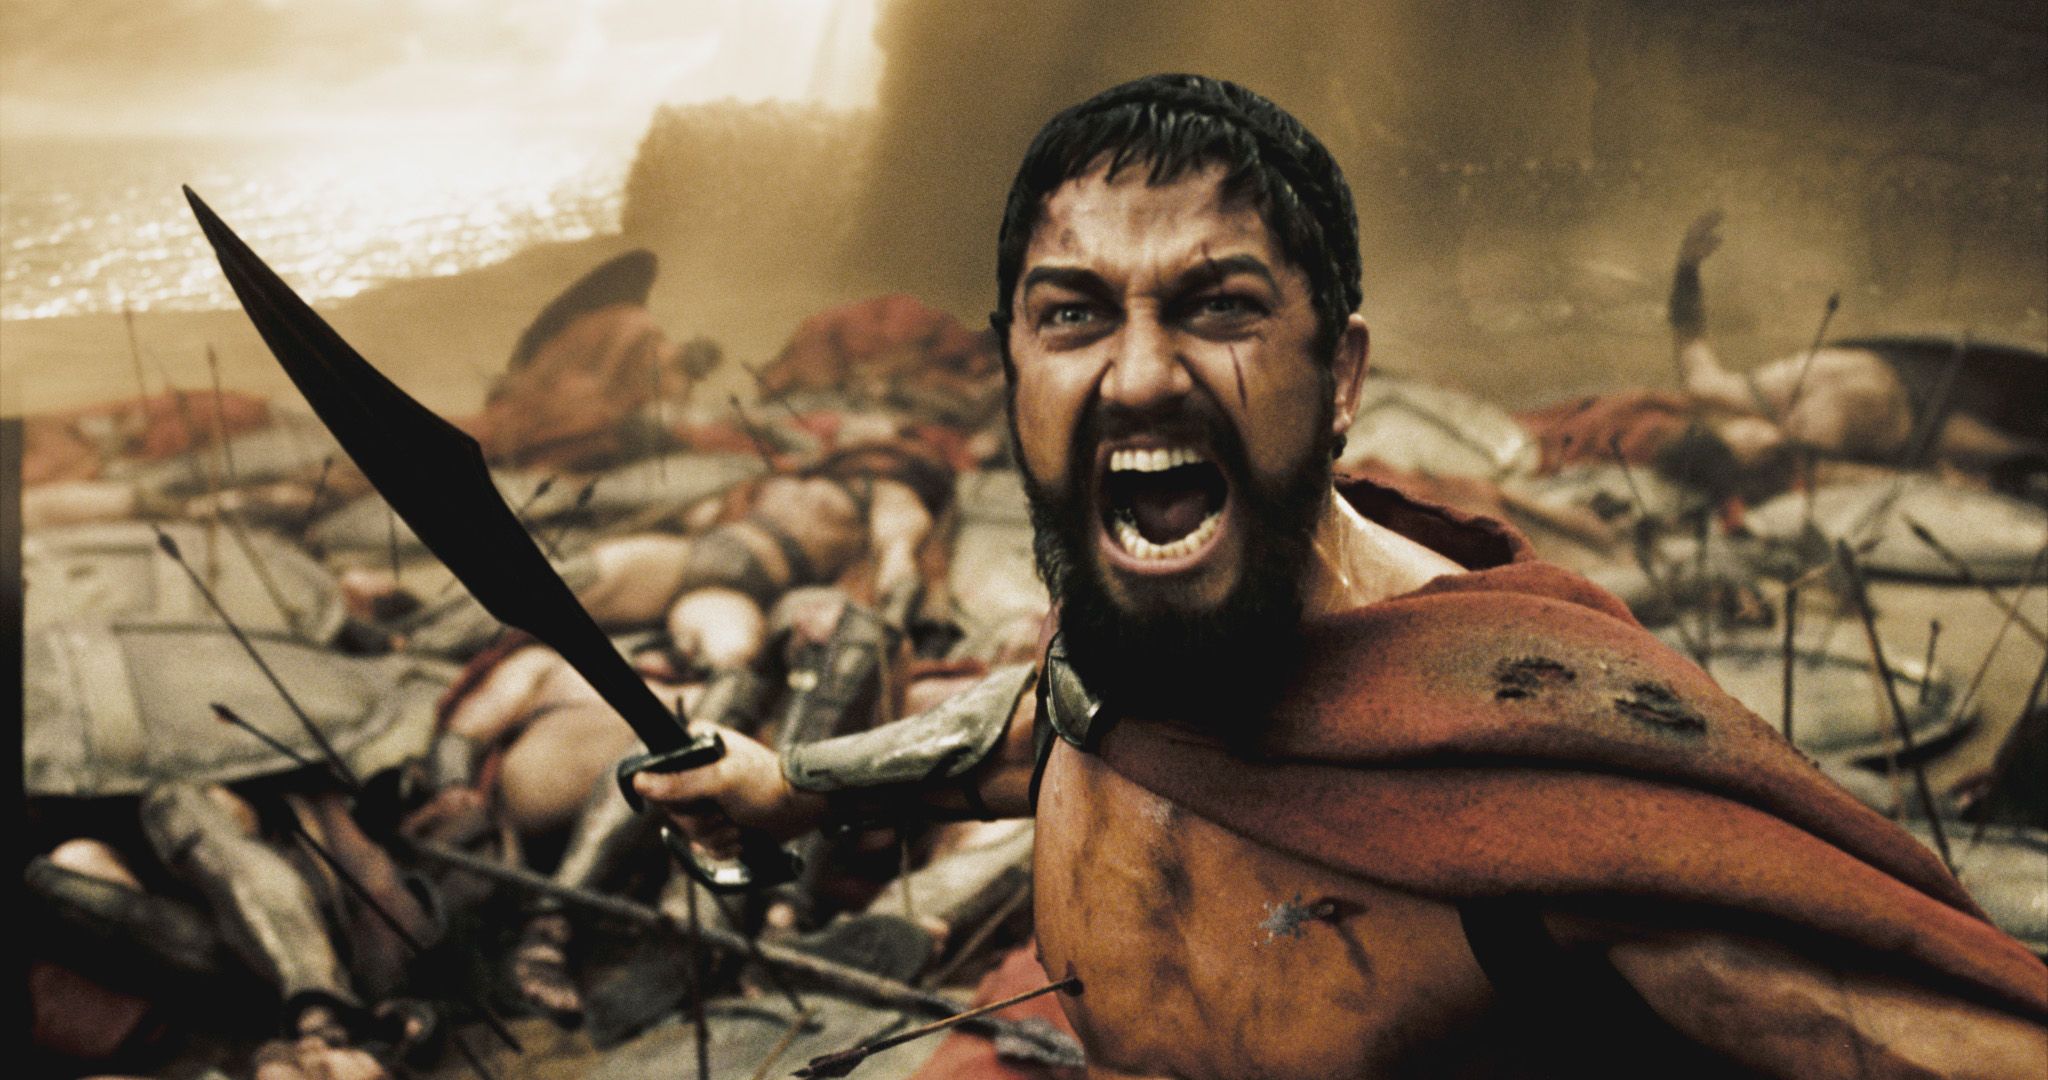 when was the movie 300 made